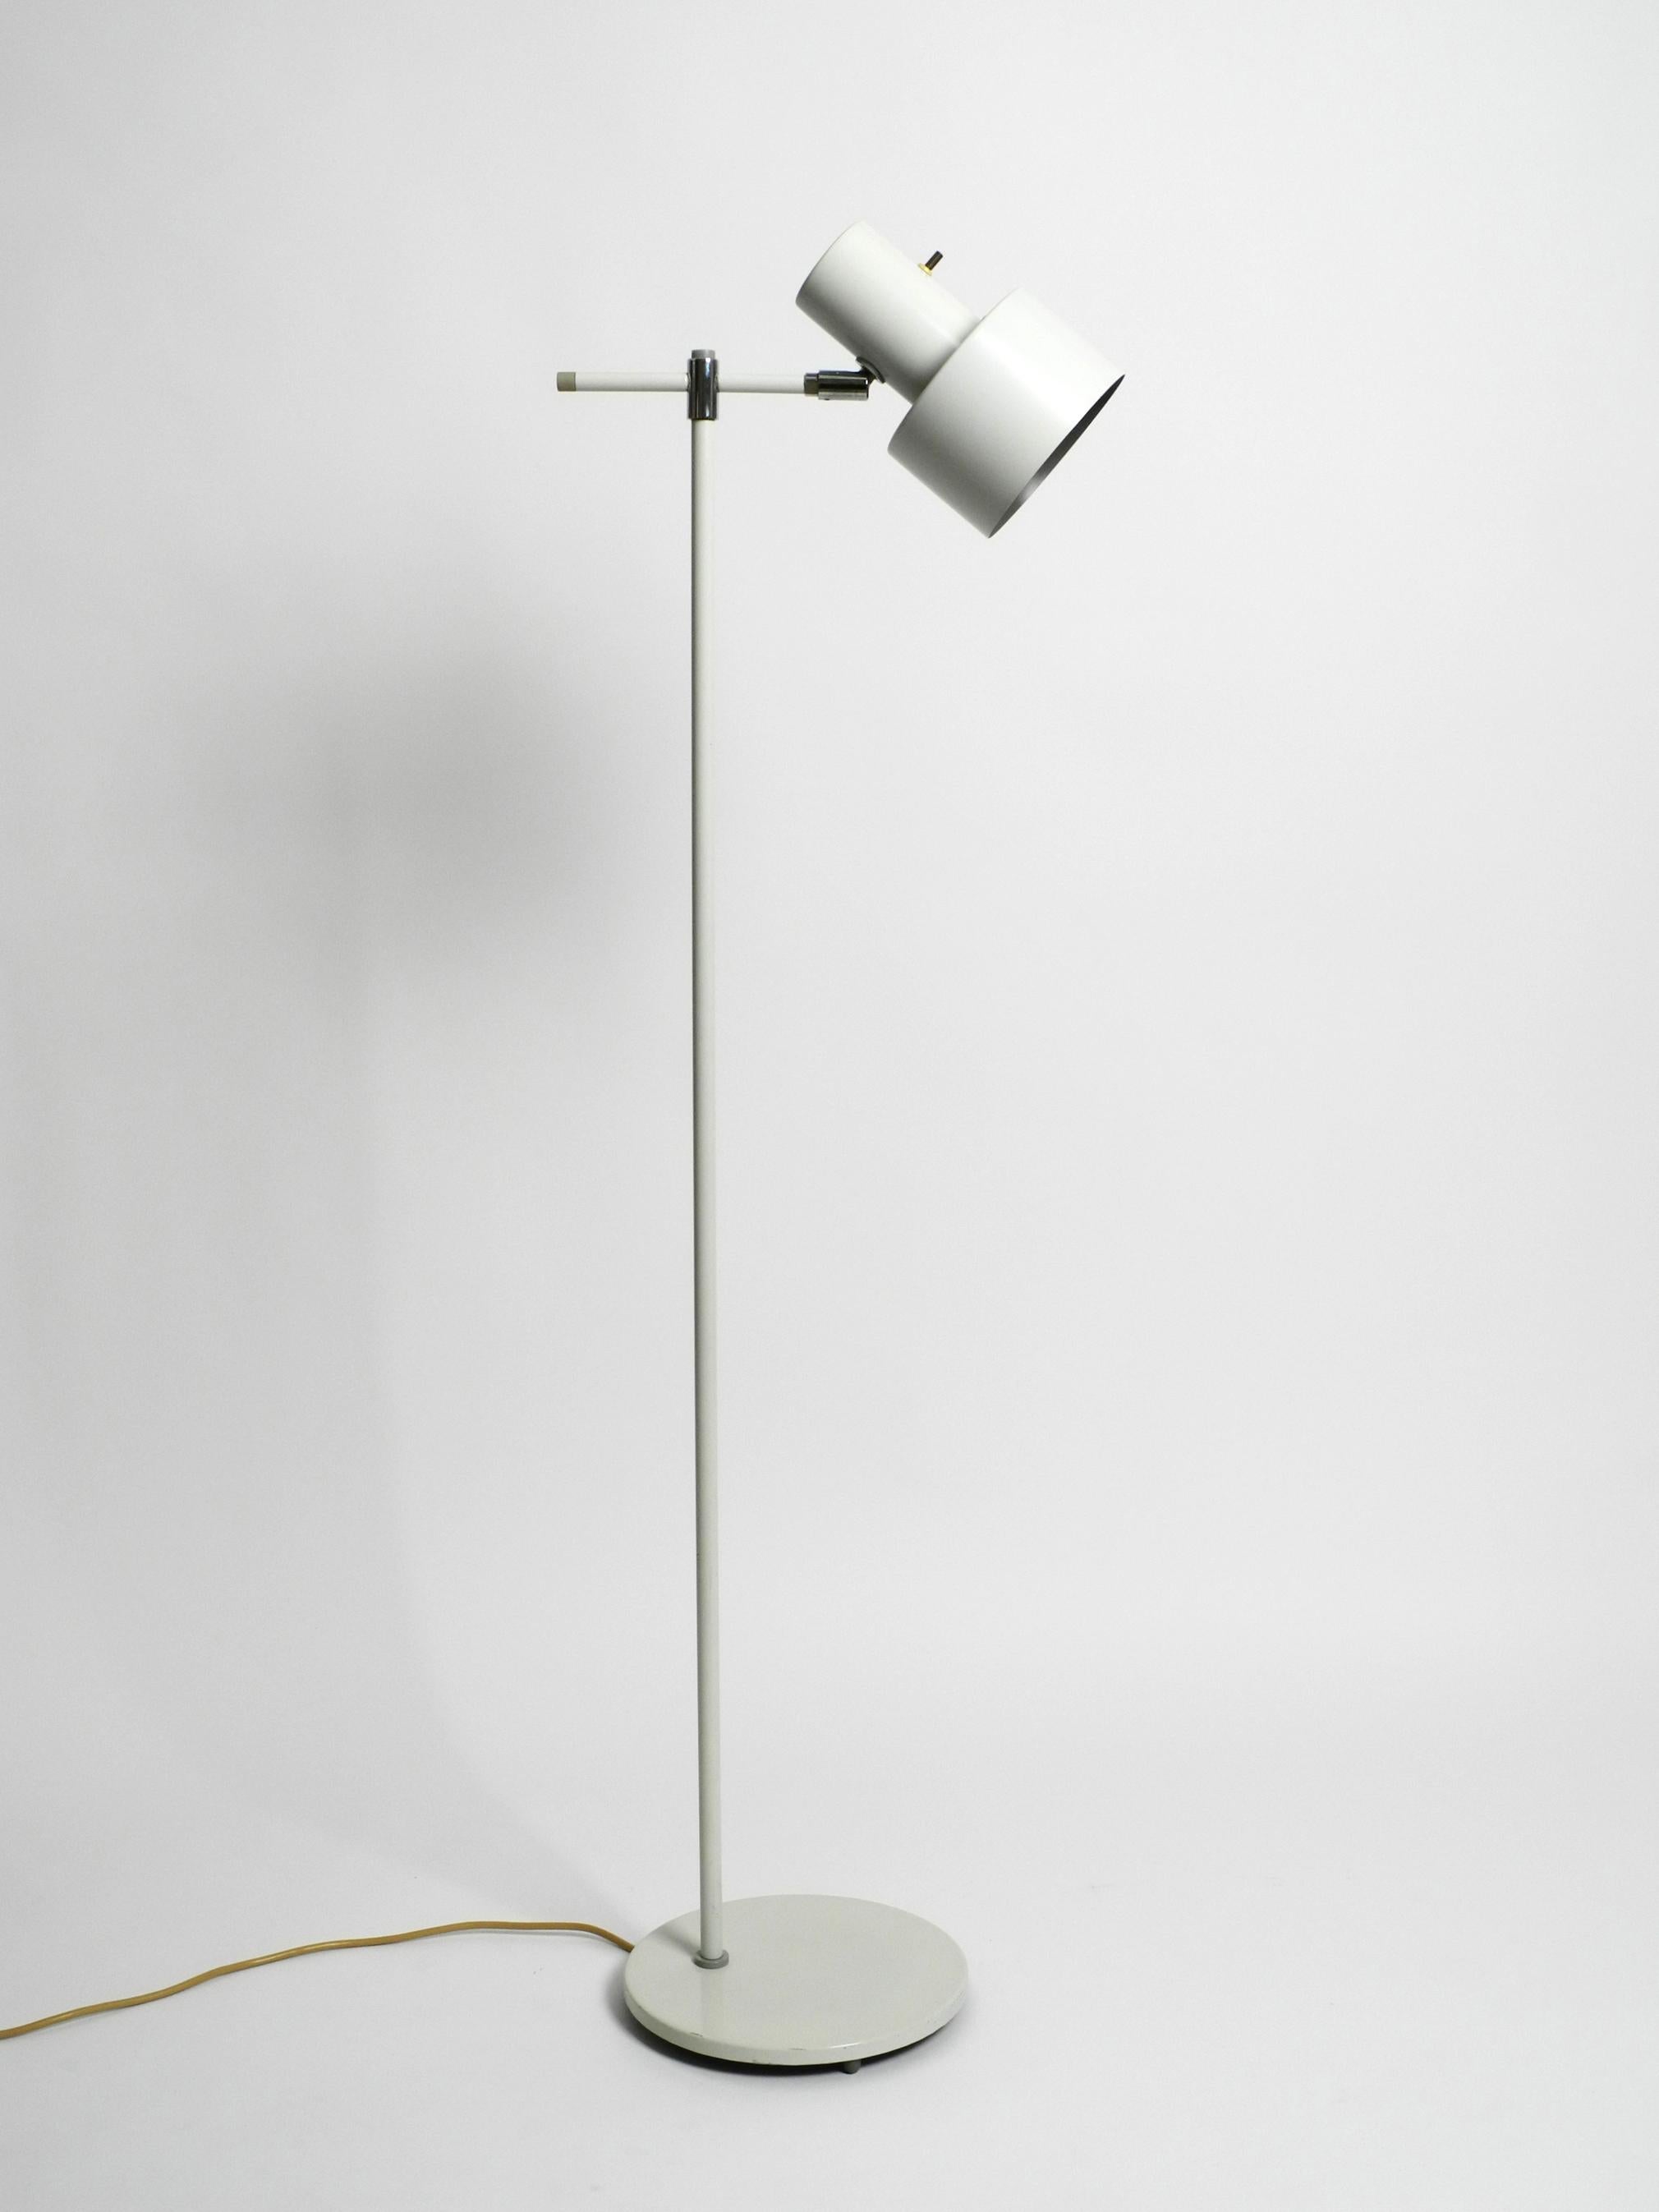 Original 1960s metal floor lamp, model Lento by Fog & Morup. Made in Denmark.
Designed by Jo Hammerborg. The well-known industrial designer from Denmark.
Minimalist Danish design for fantastically beautiful light. Very good vintage condition in